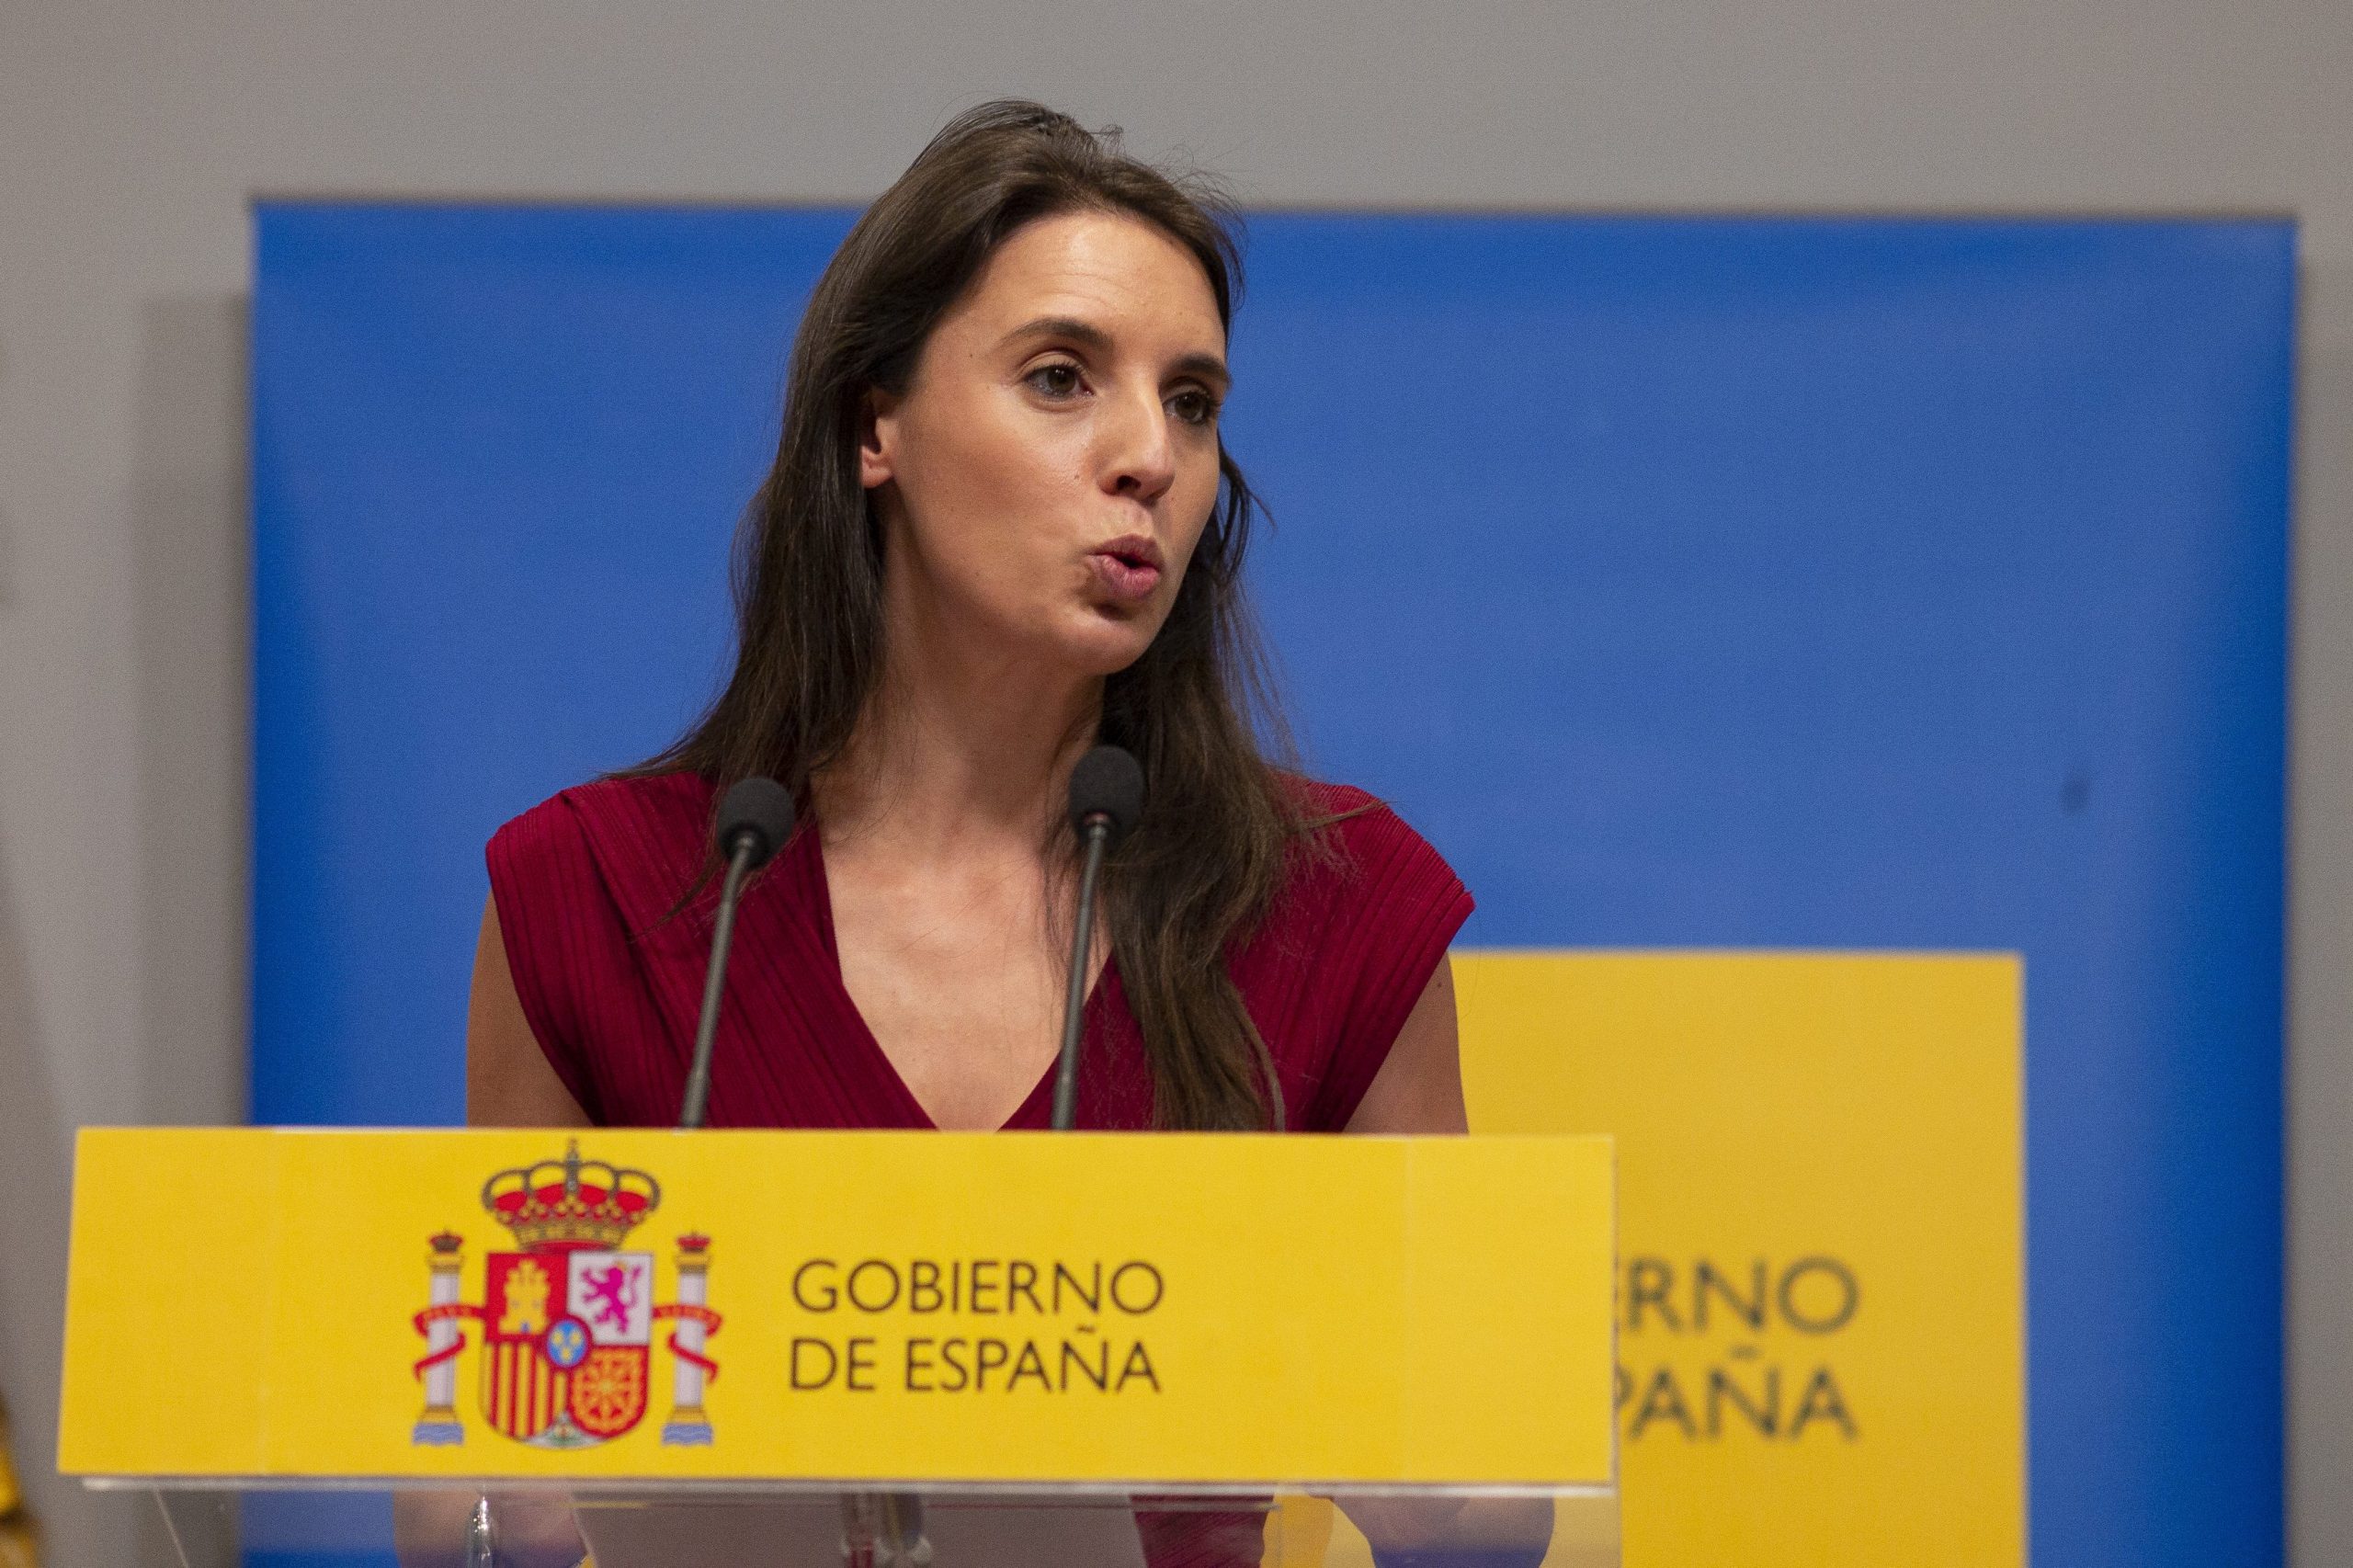 Spain’s equality minister sparks congressional outrage, accusing PP of ‘promoting rape culture’